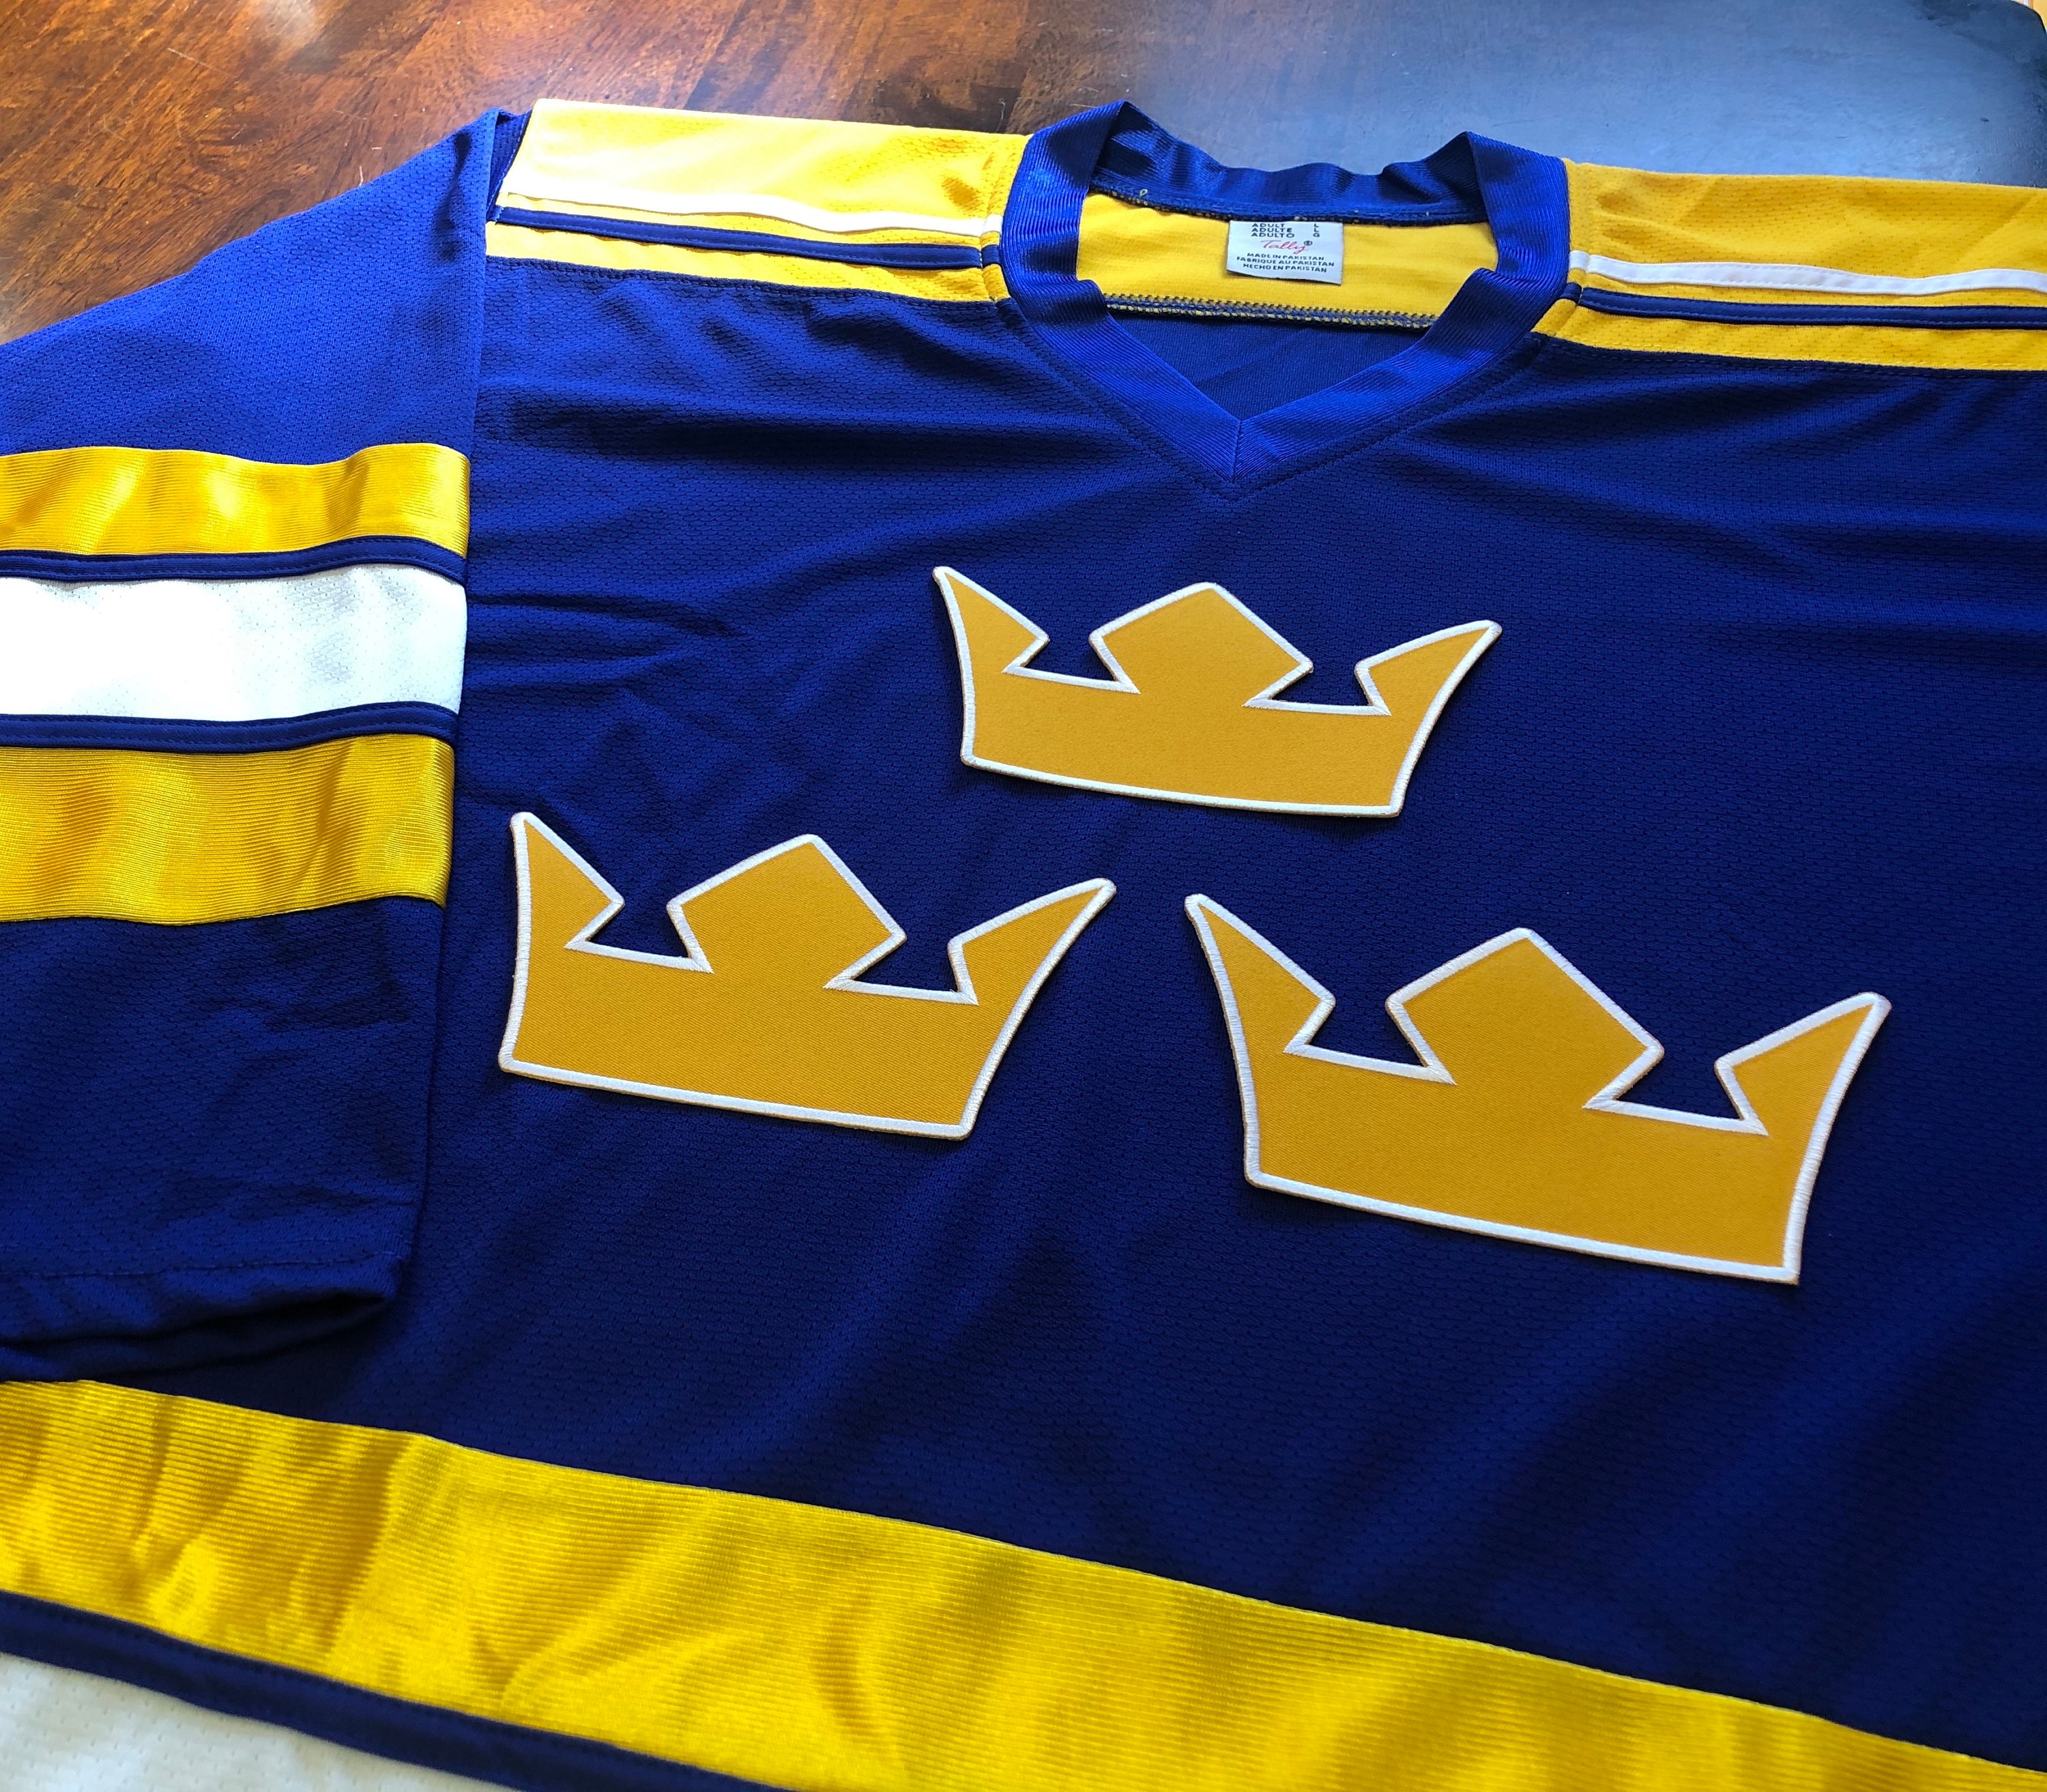 Team Sweden BLUE Ice Hockey Jersey Custom Name and Number with embroideries